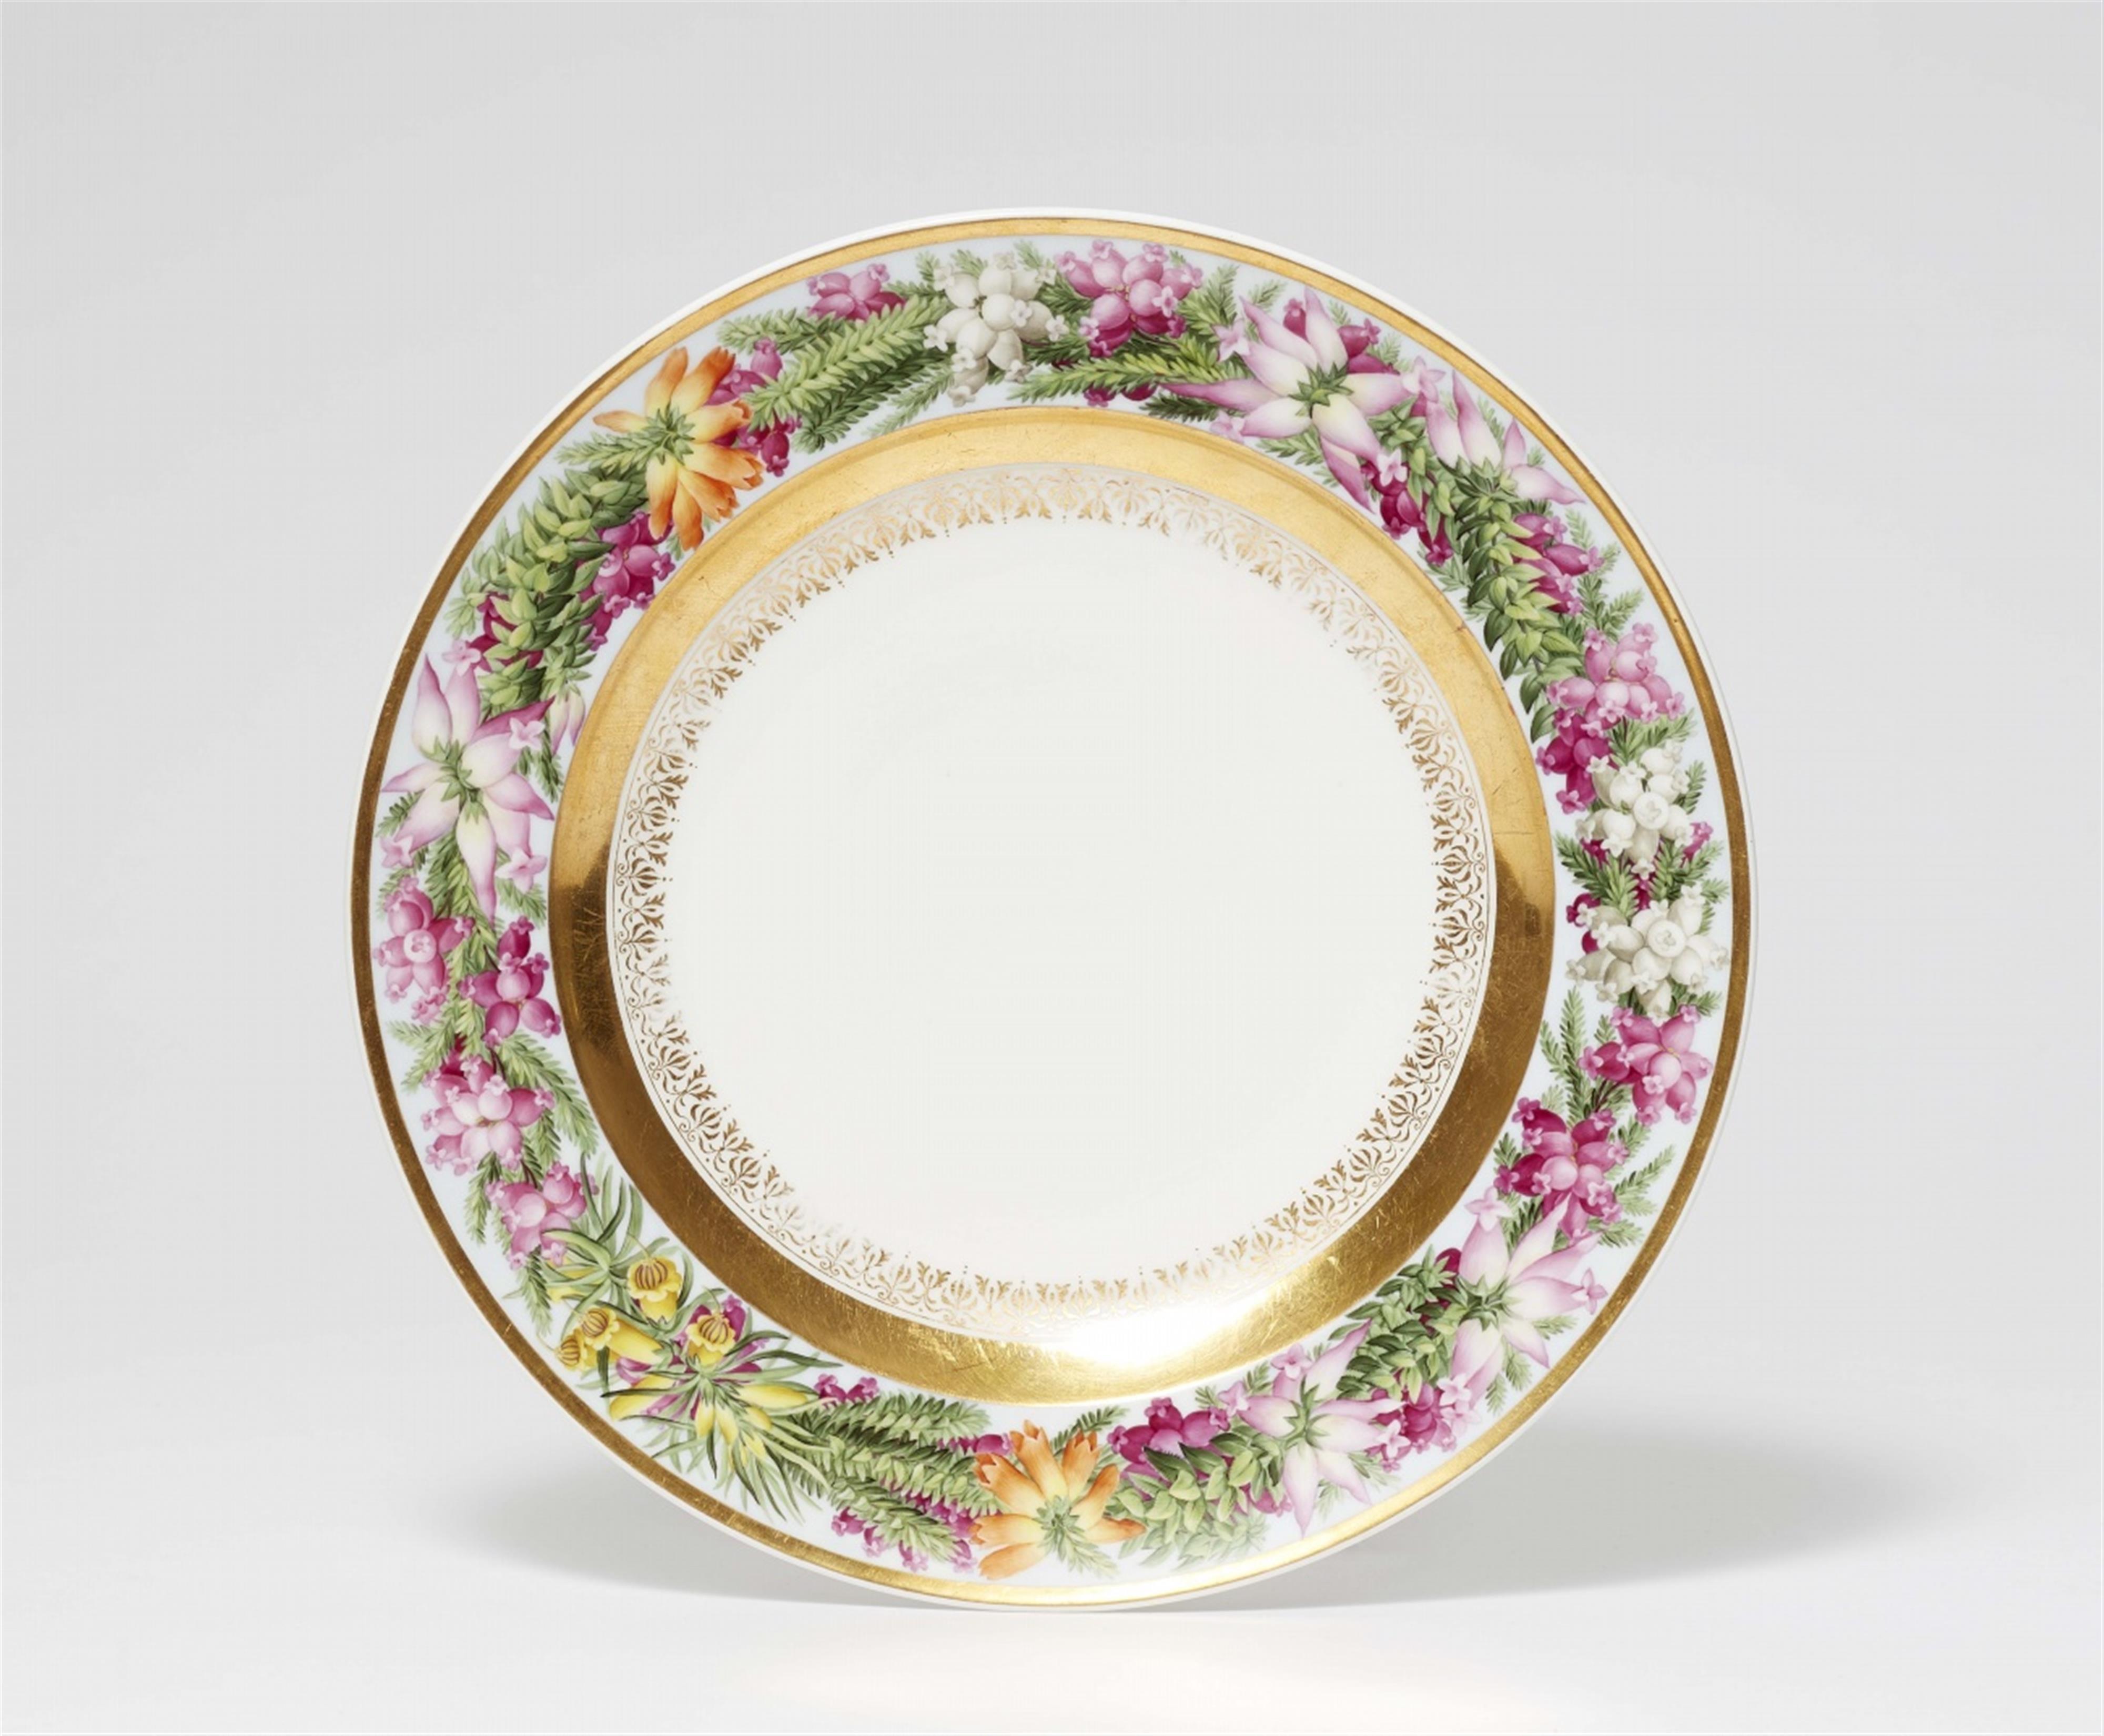 A Berlin KPM porcelain dinner plate from the wedding service for Princess Luise - image-1